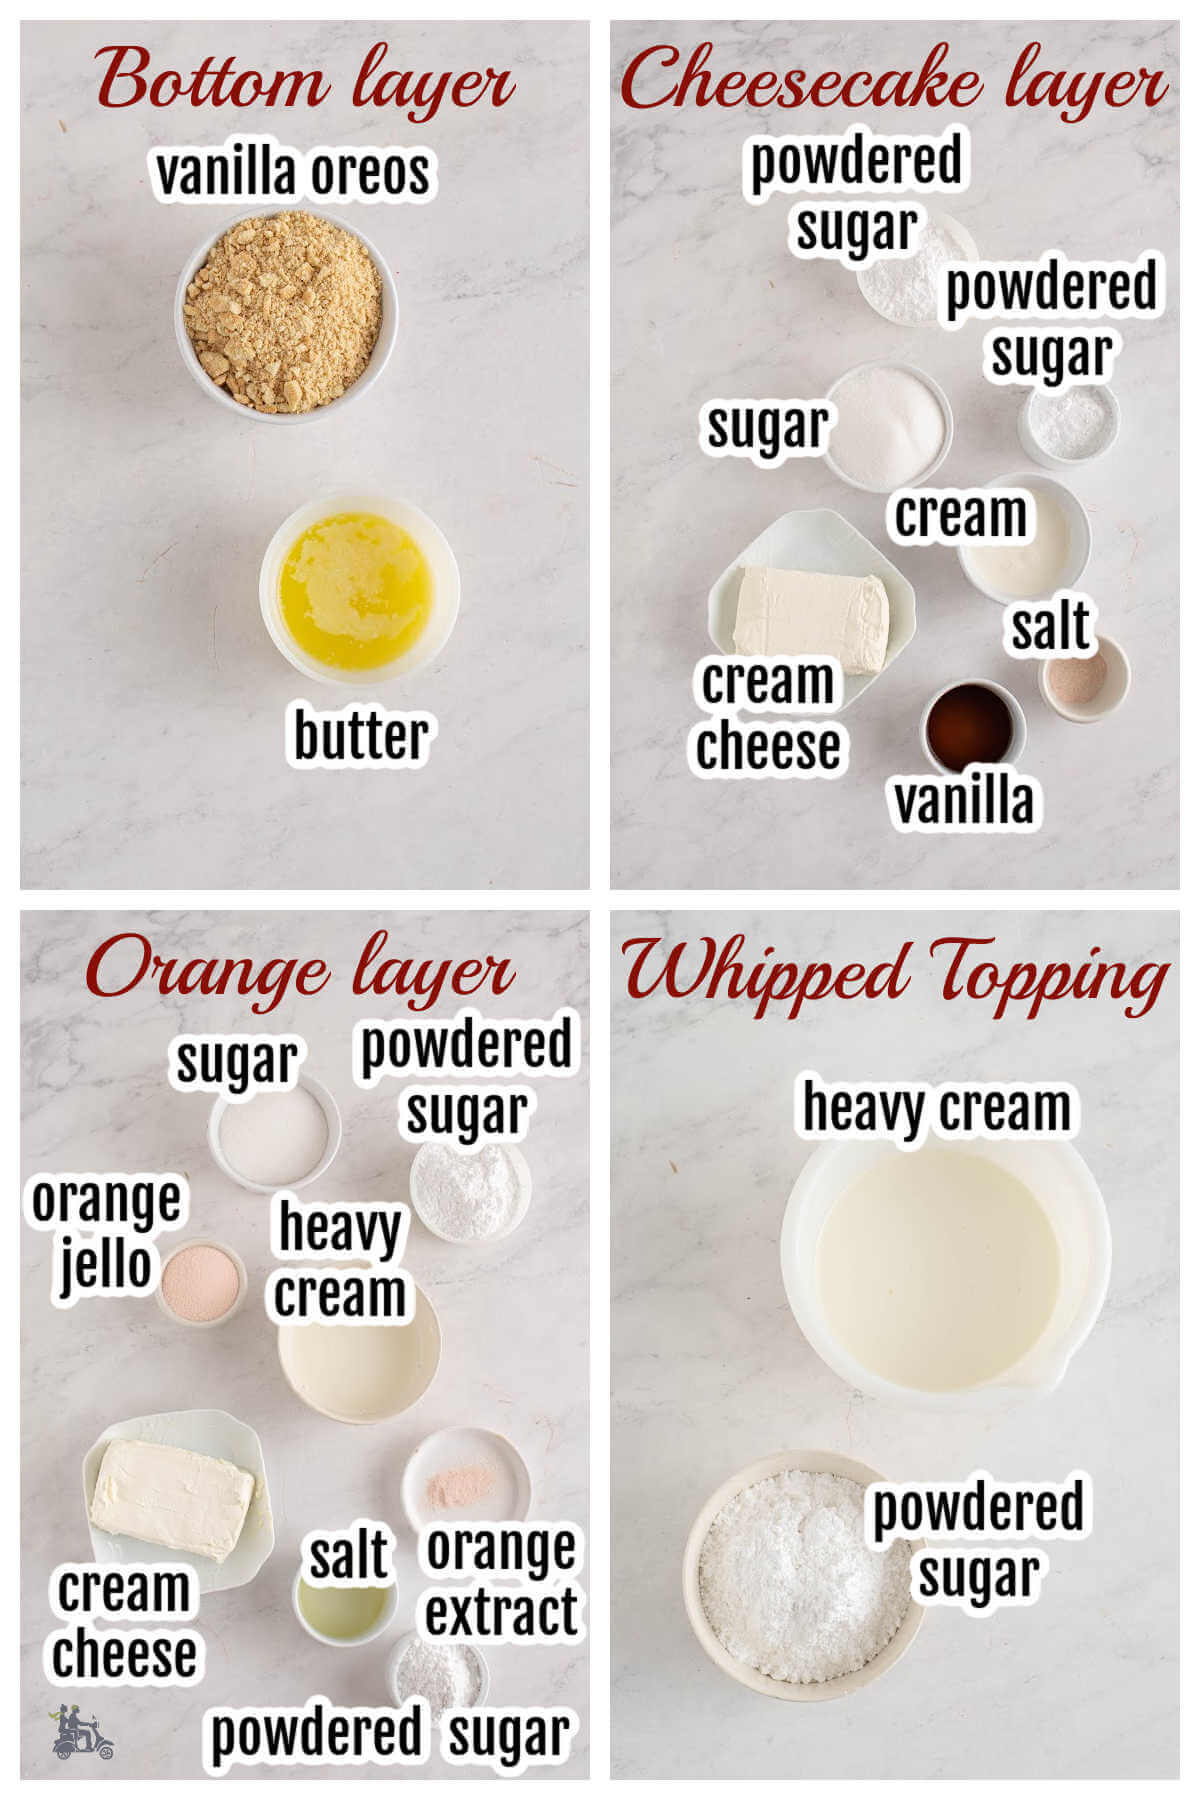 Image of the ingredients needed to make the Orange Creamsicle Bars.